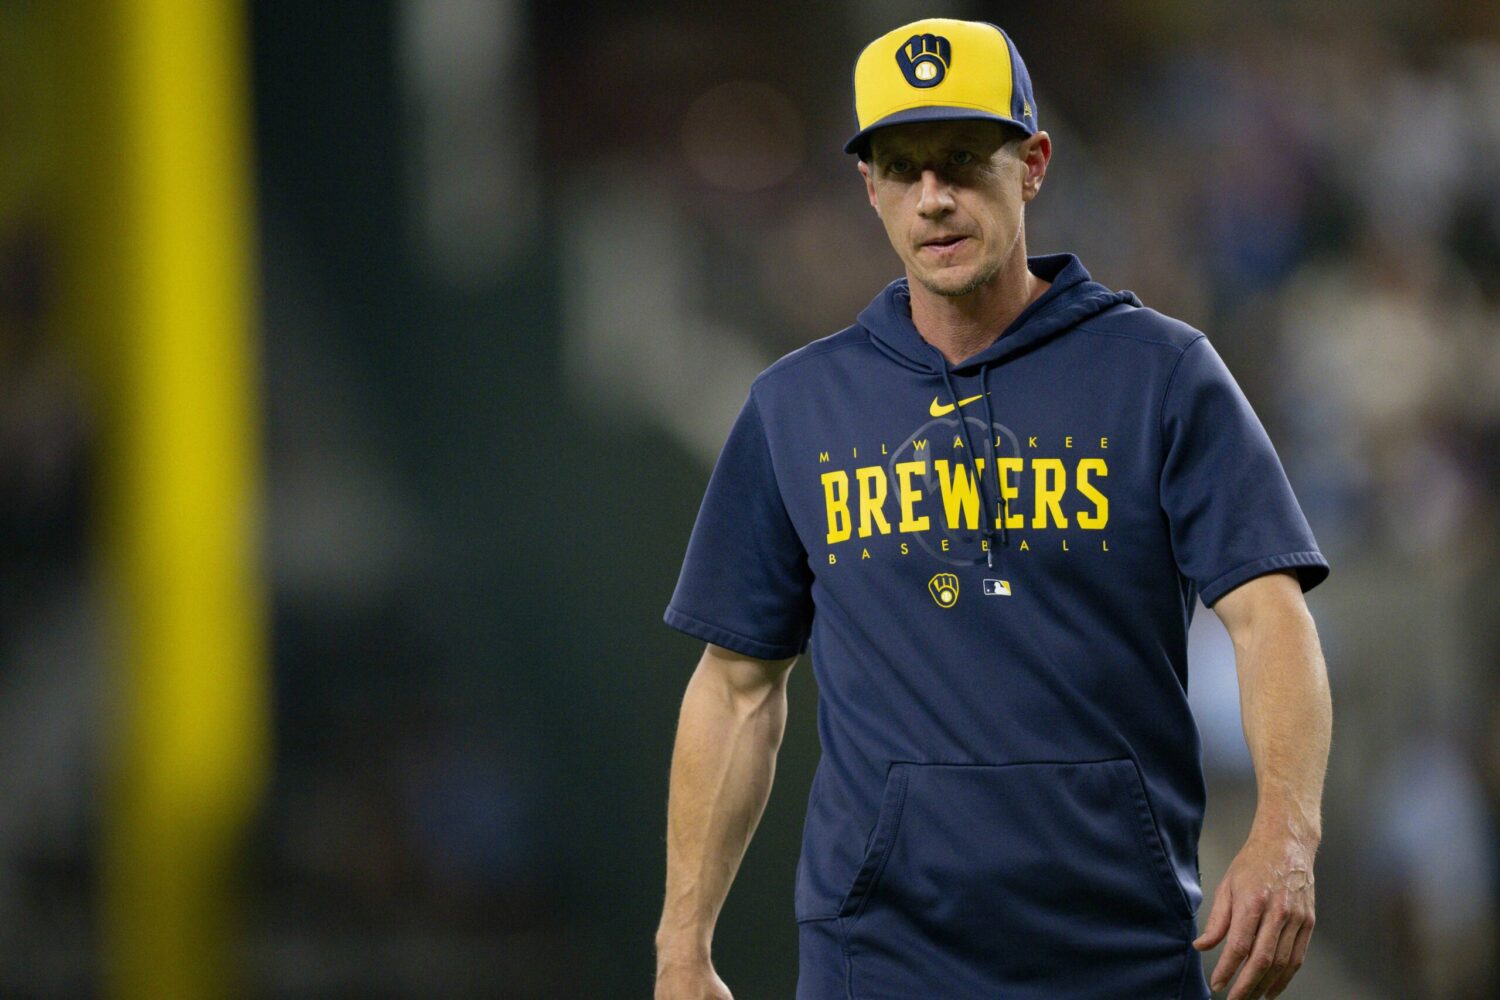 Brewers manager Craig Counsell happy baseball trying new things